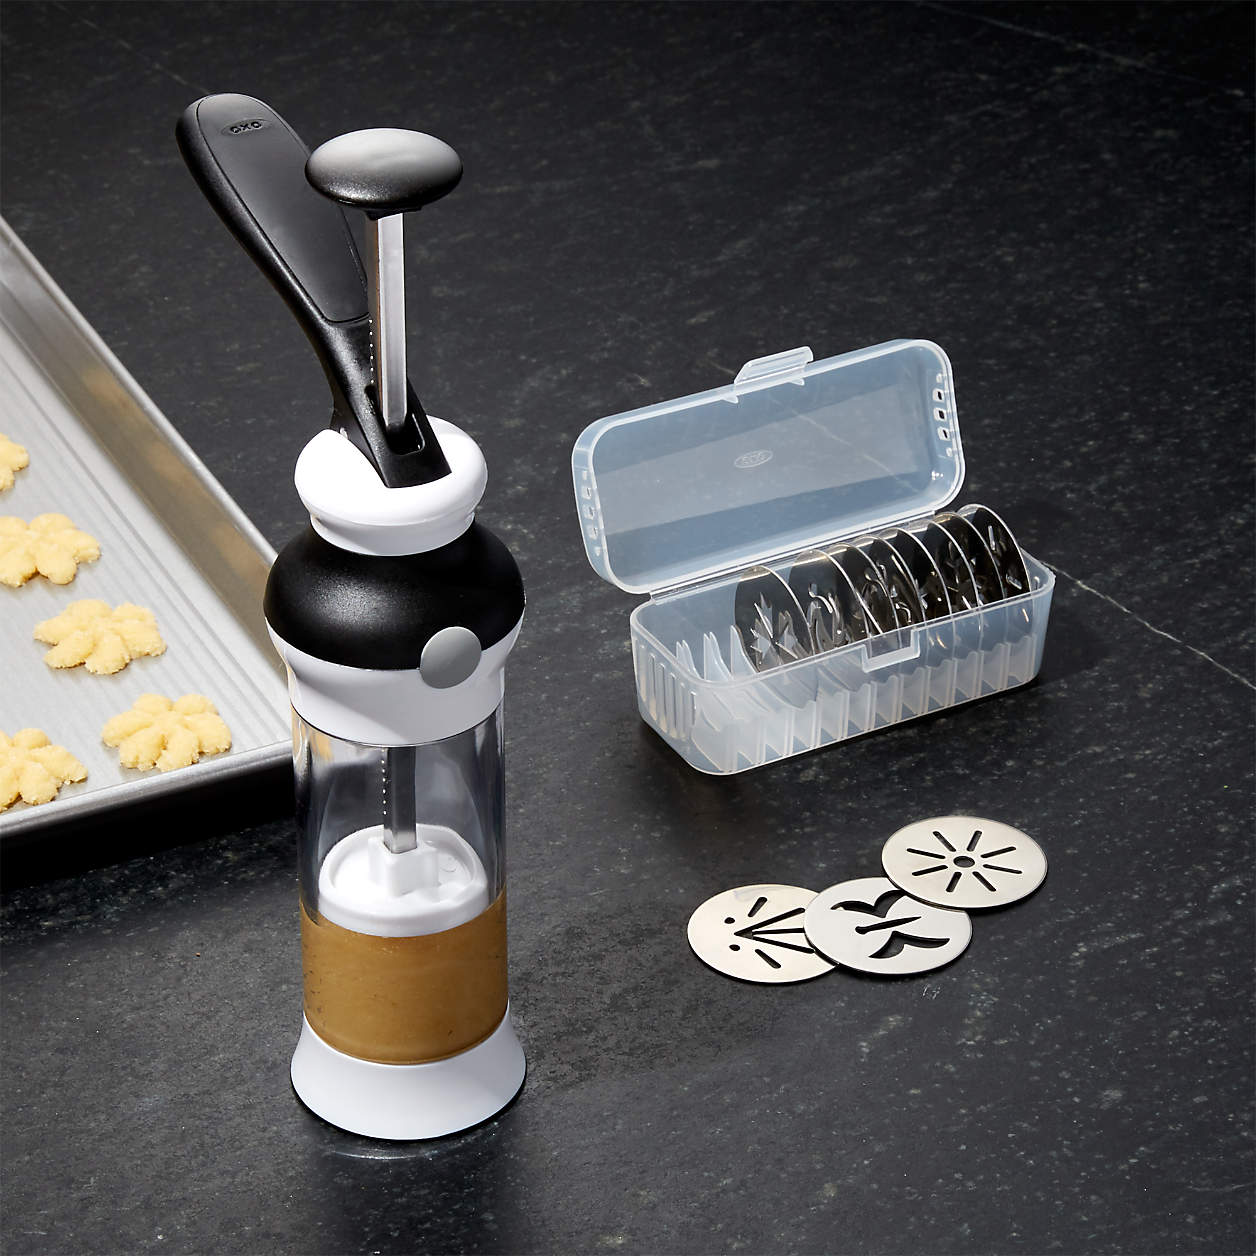 cookie press filled with dough, storage case with discs in it, and a baking sheet with pressed cookie dough on it on a dark grey countertop.